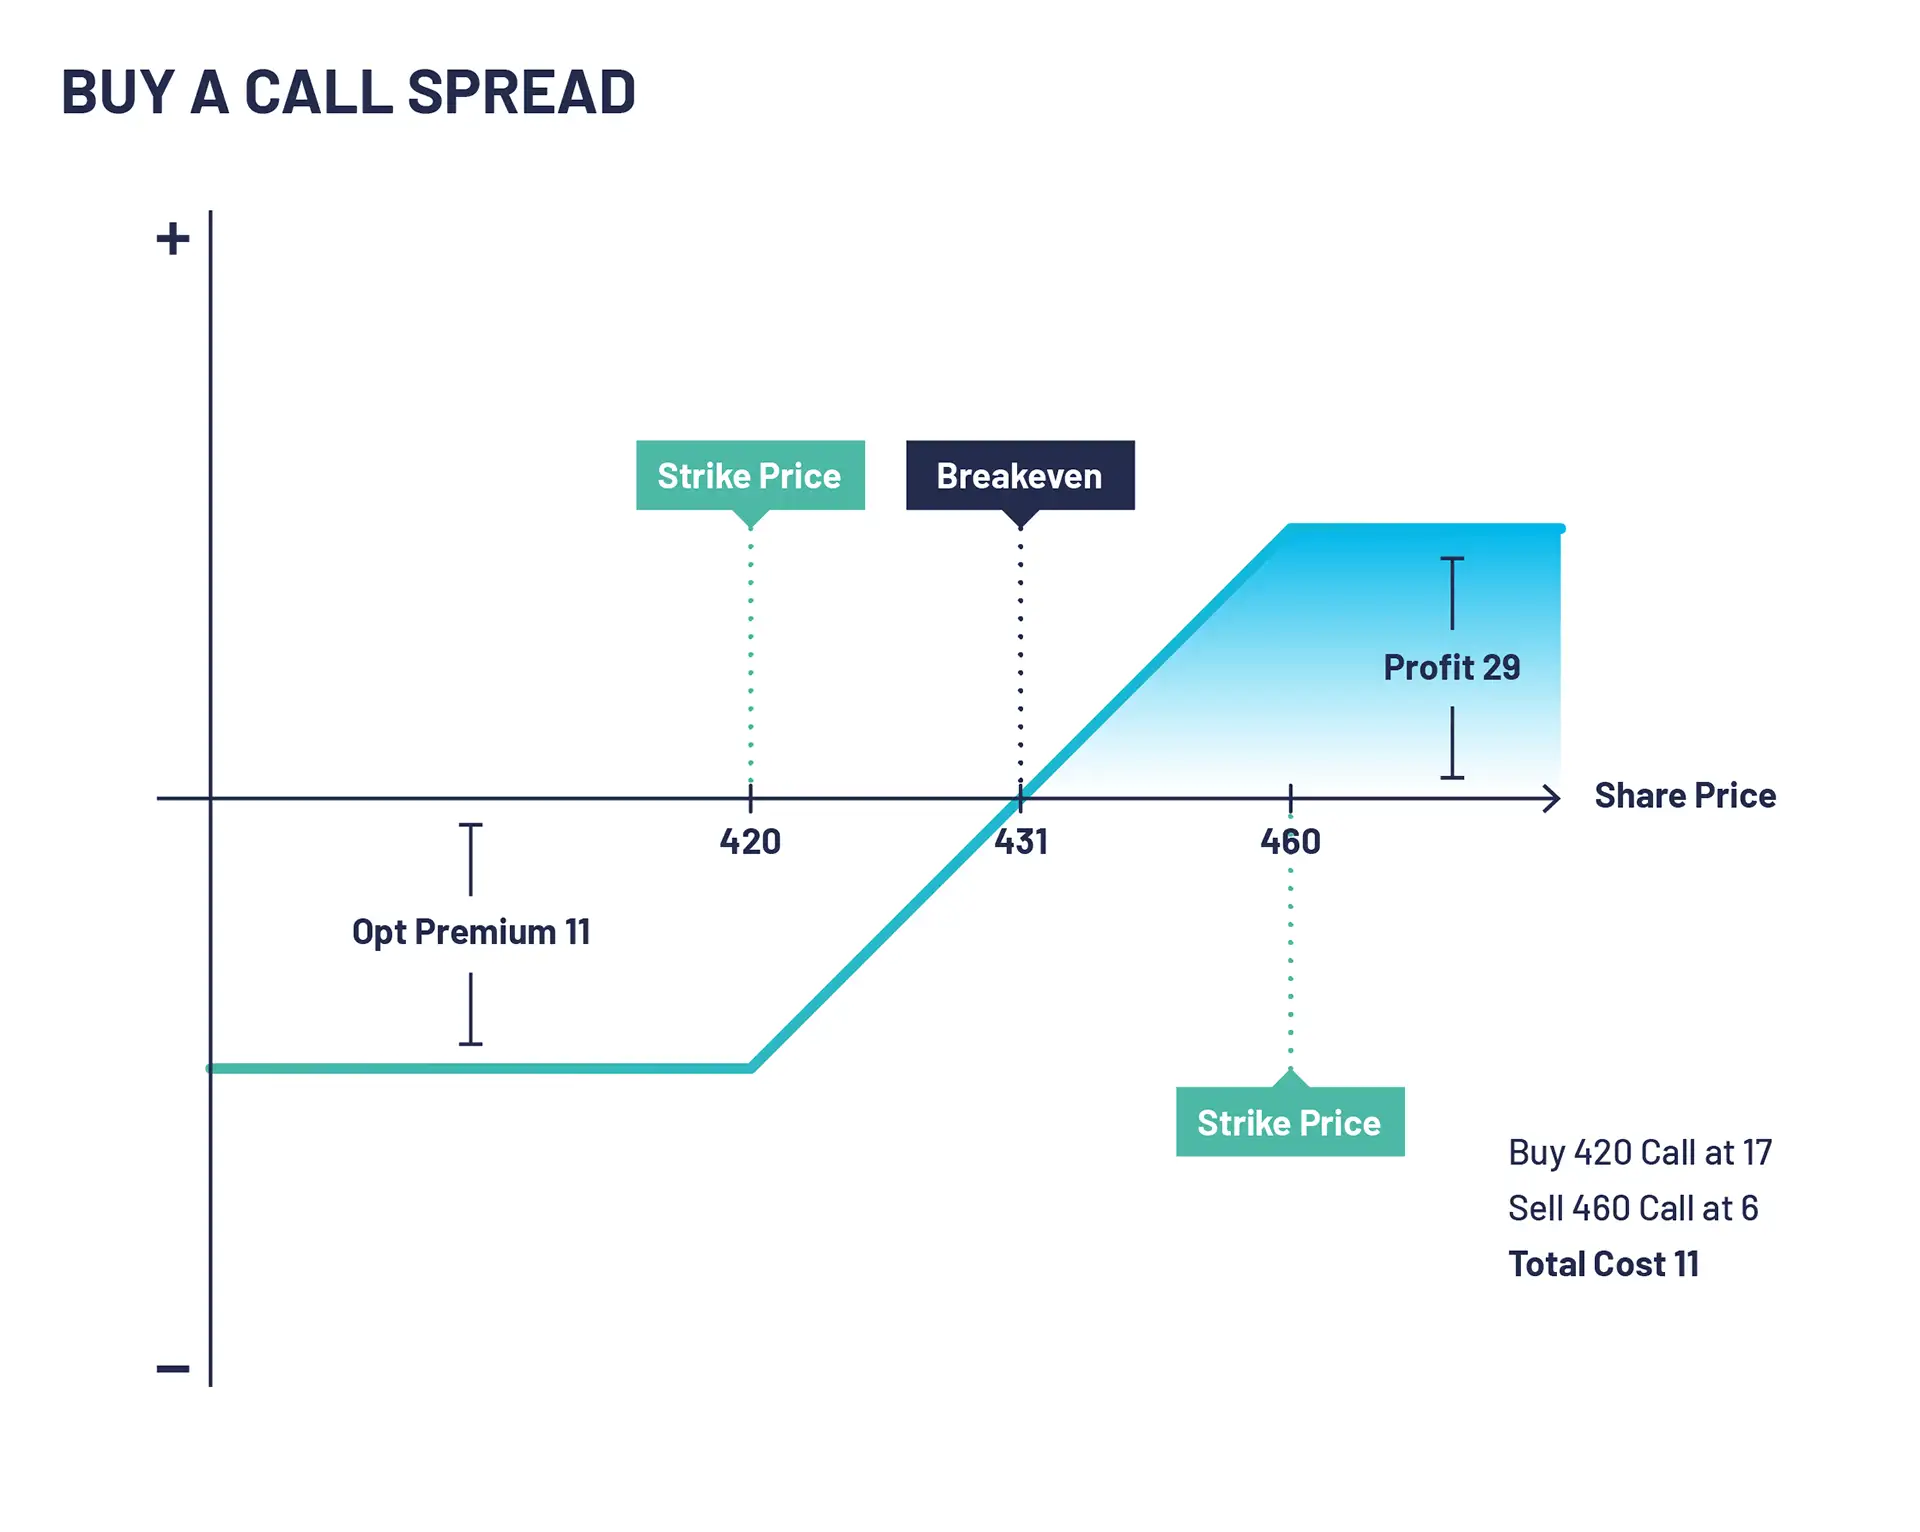 The image shows a graph of buying a call spread, the price of the options premium, strike price, breakeven and profit. 